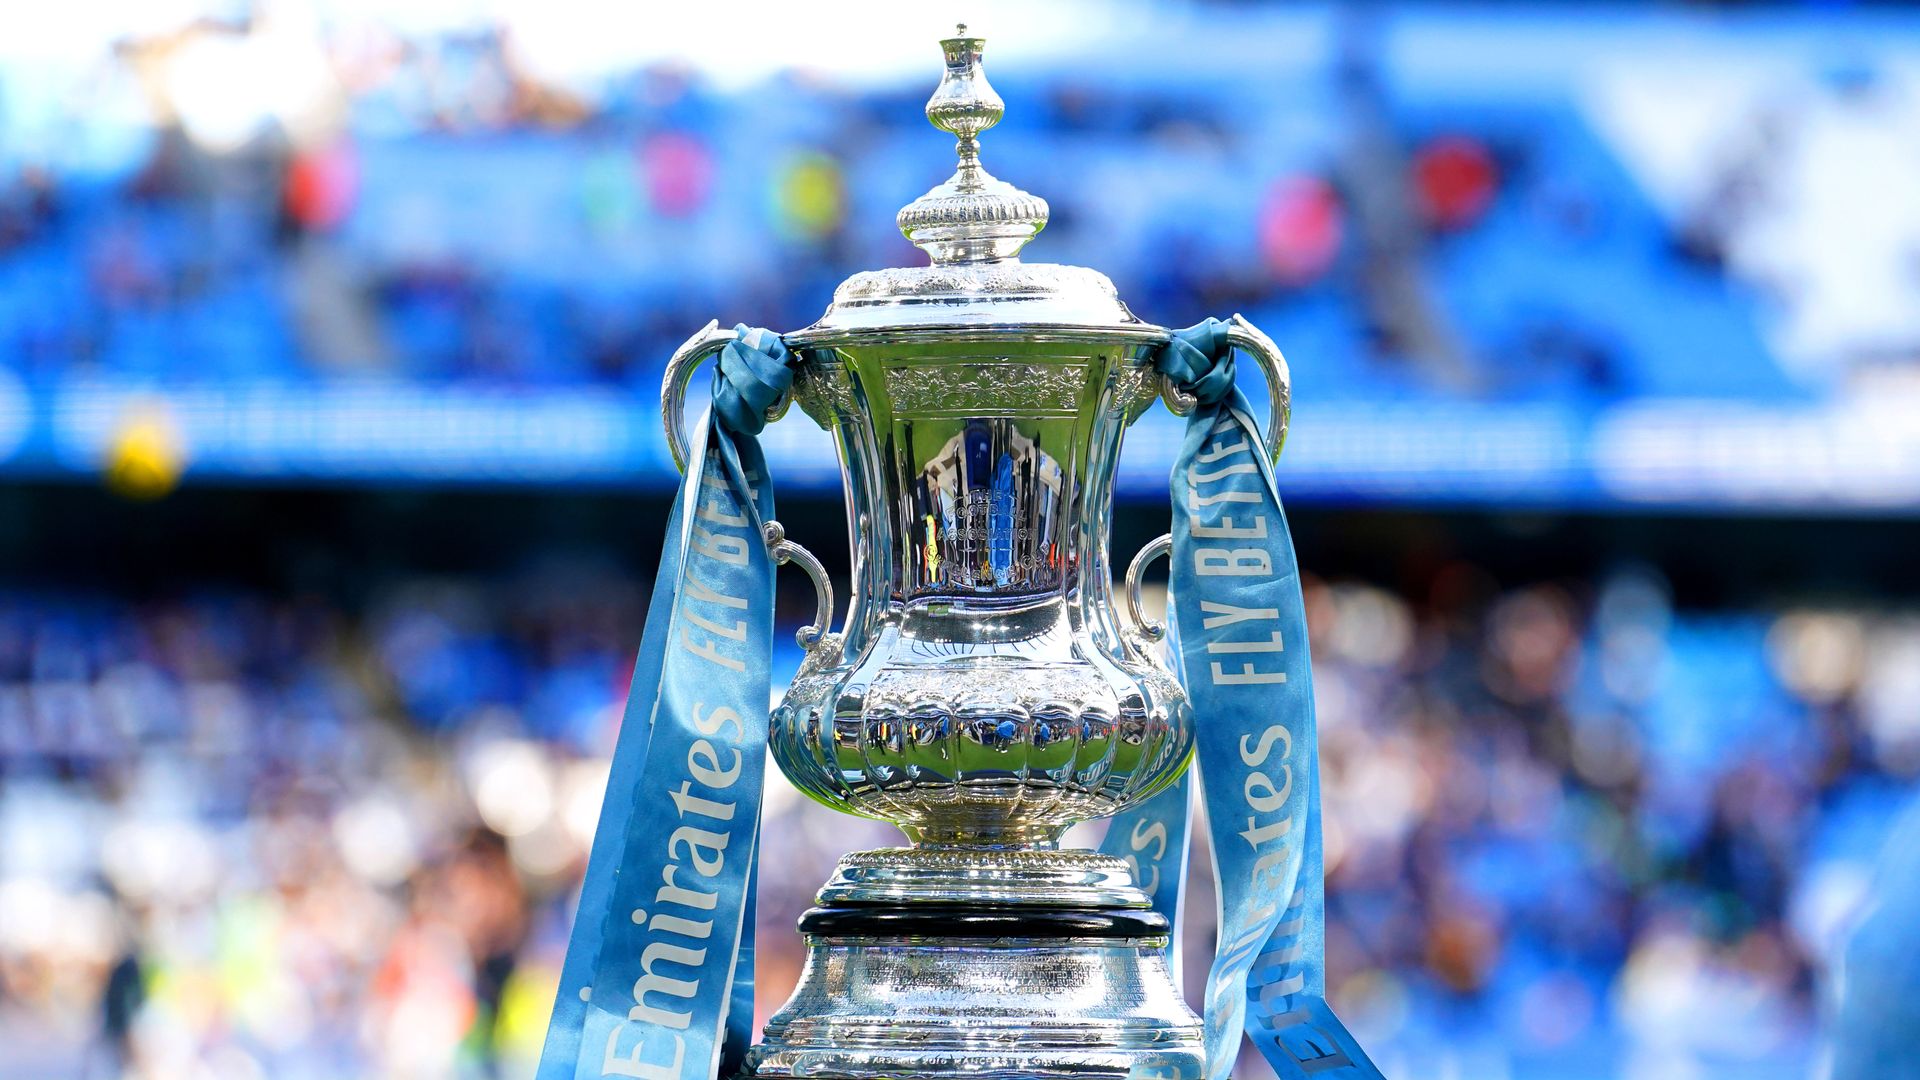 Man City to play Chelsea in FA Cup semi-finals as Man Utd draw Coventry